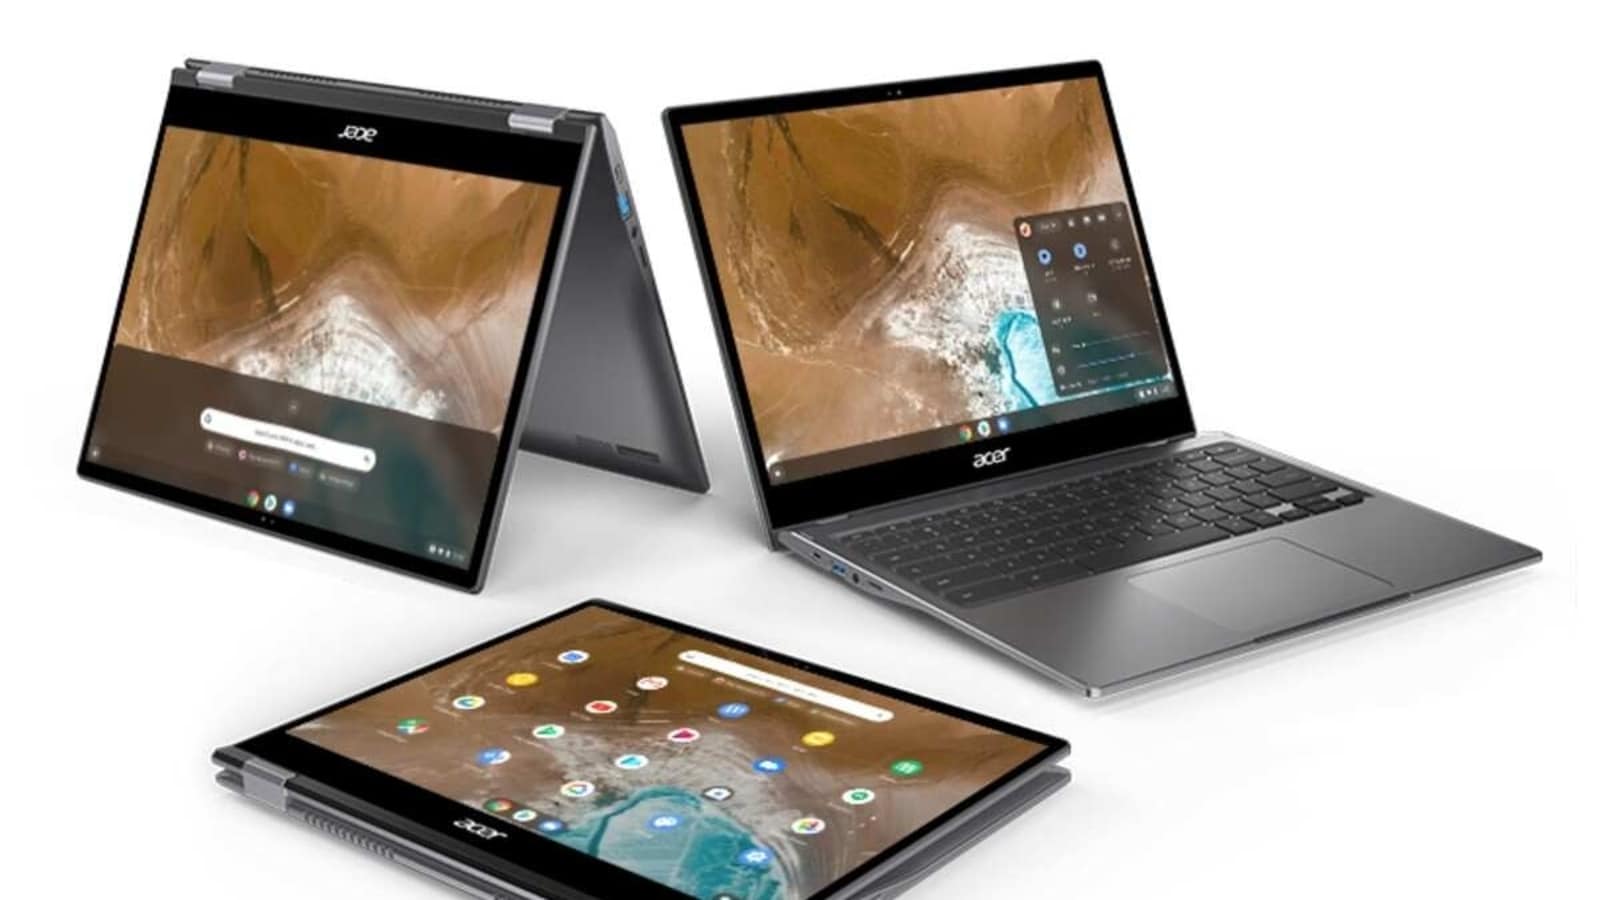 Best 10 small laptops: From Acer, Lenovo to ASUS, check out these amazing compact devices